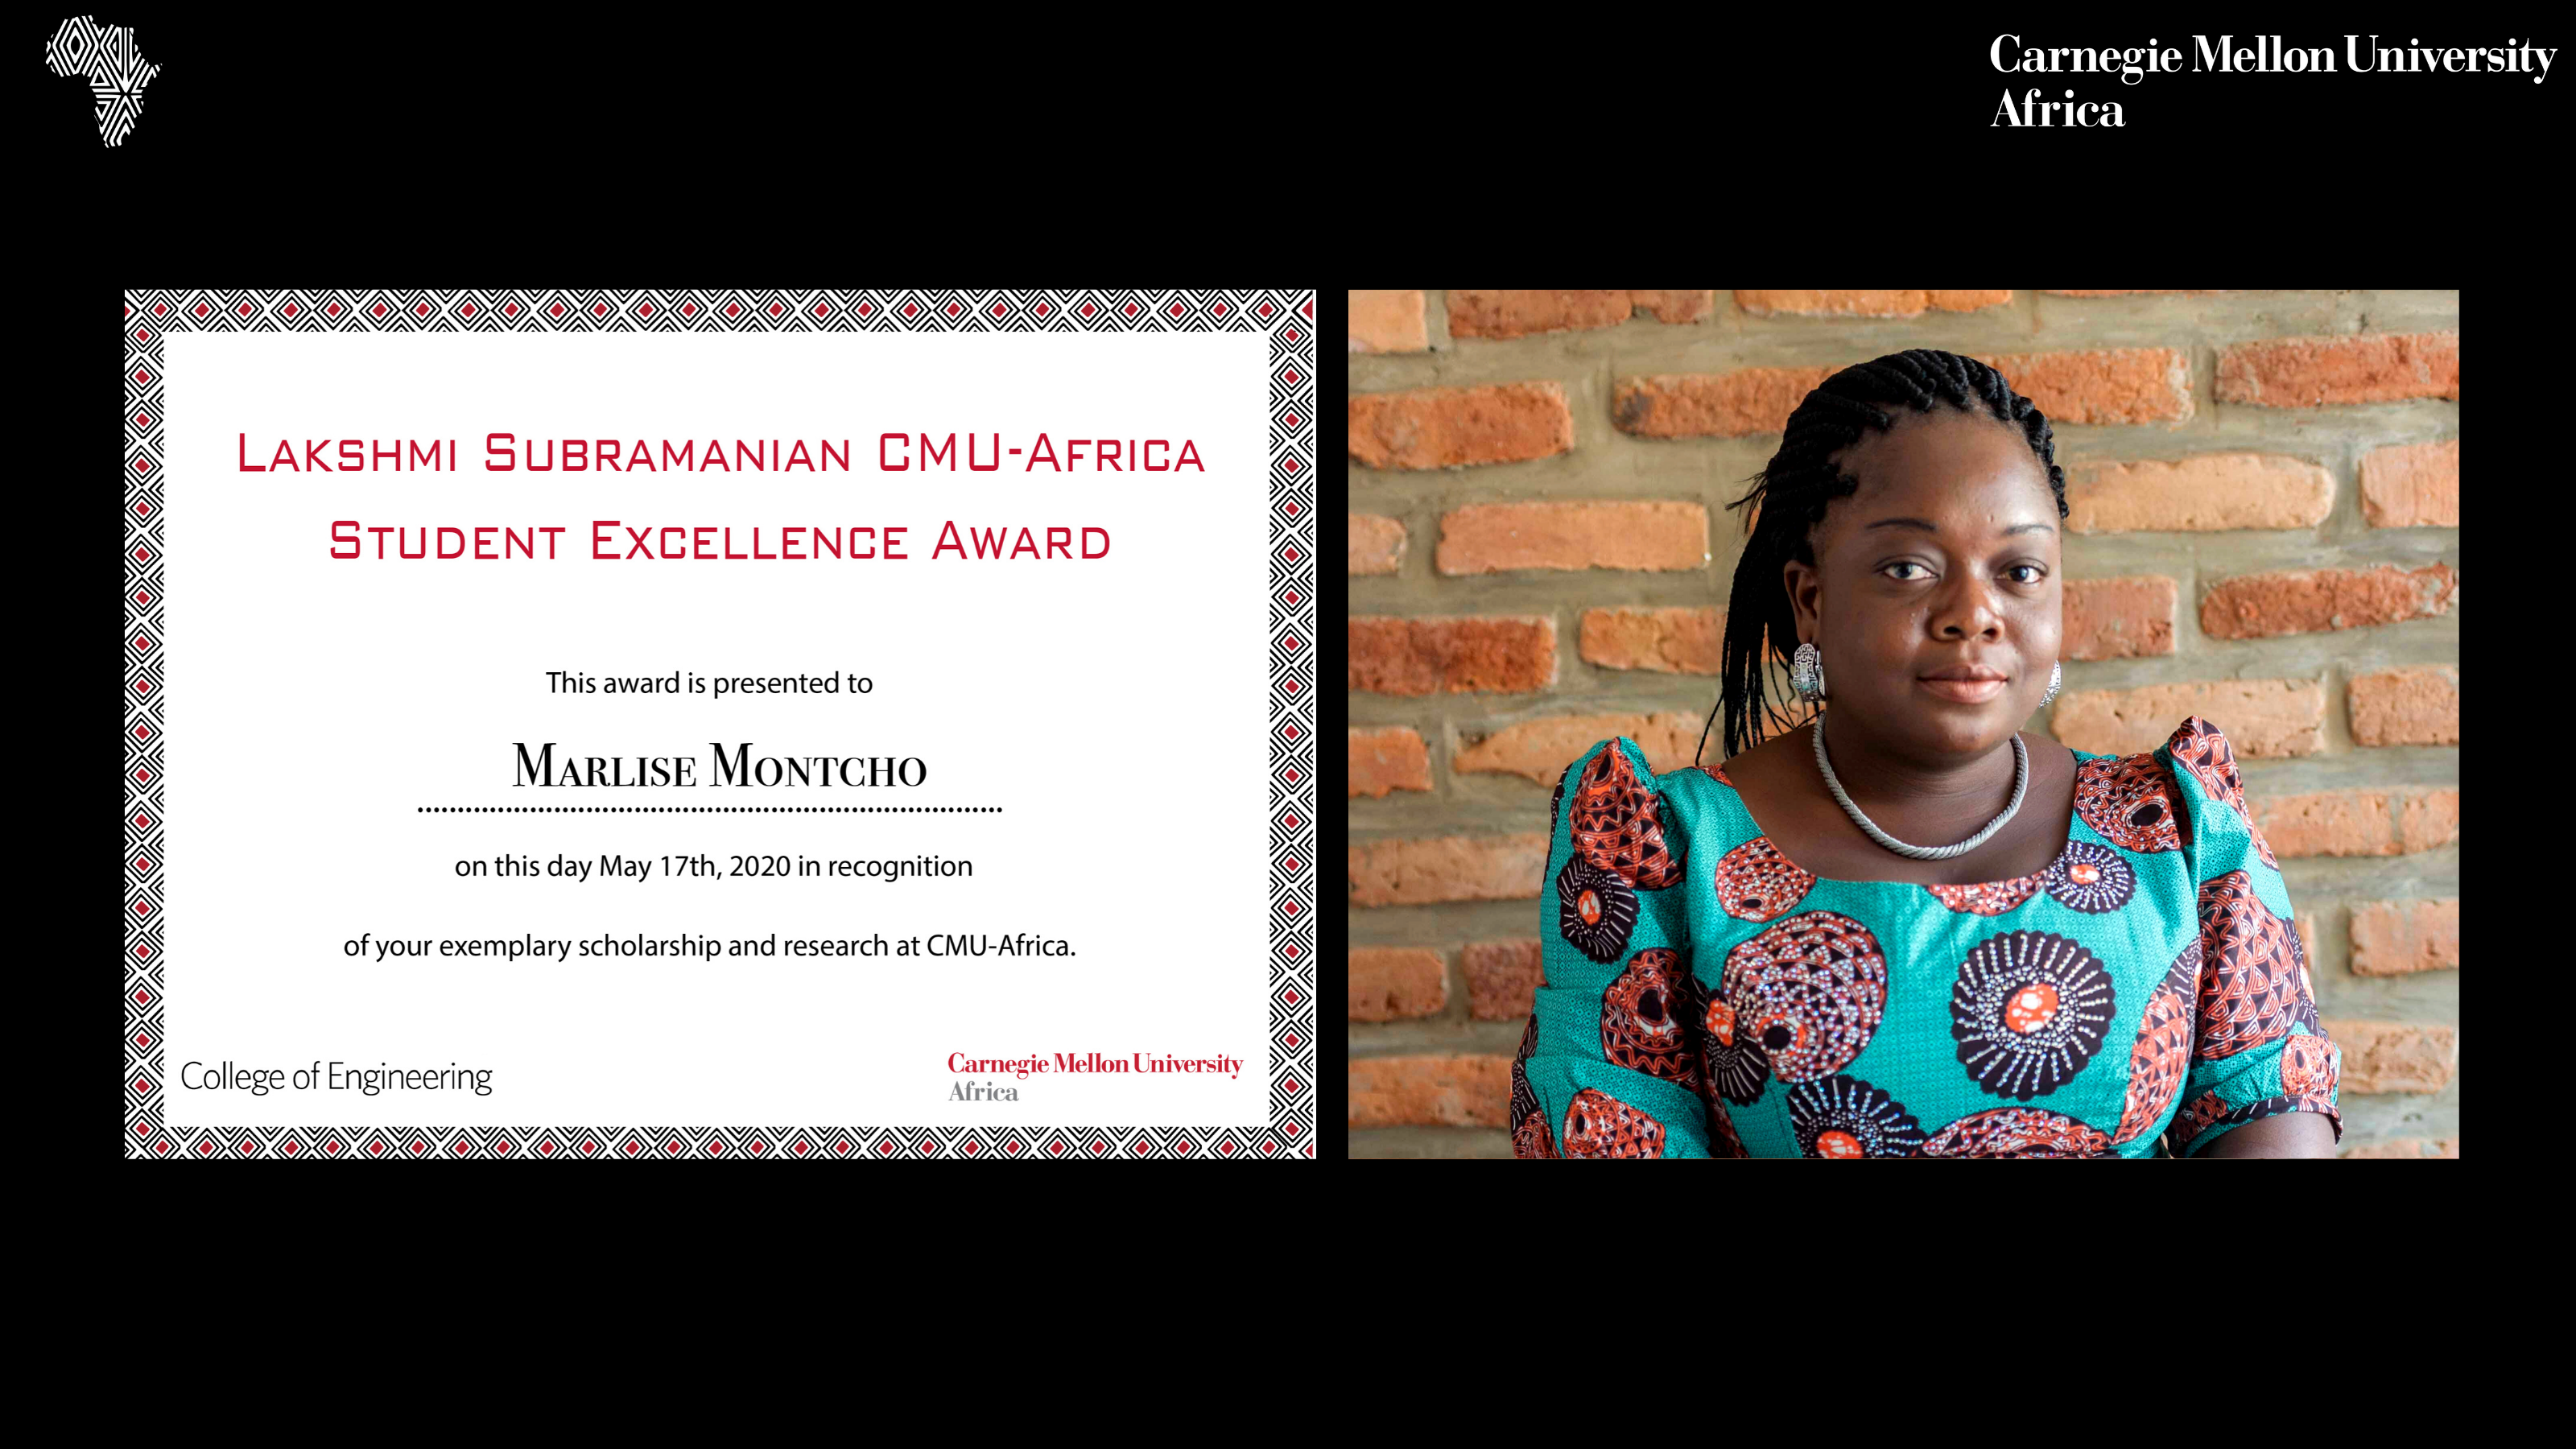 Marlise Montcho  (E’20) received the Lakshmi Subramanian CMU-Africa Student Excellence Award 